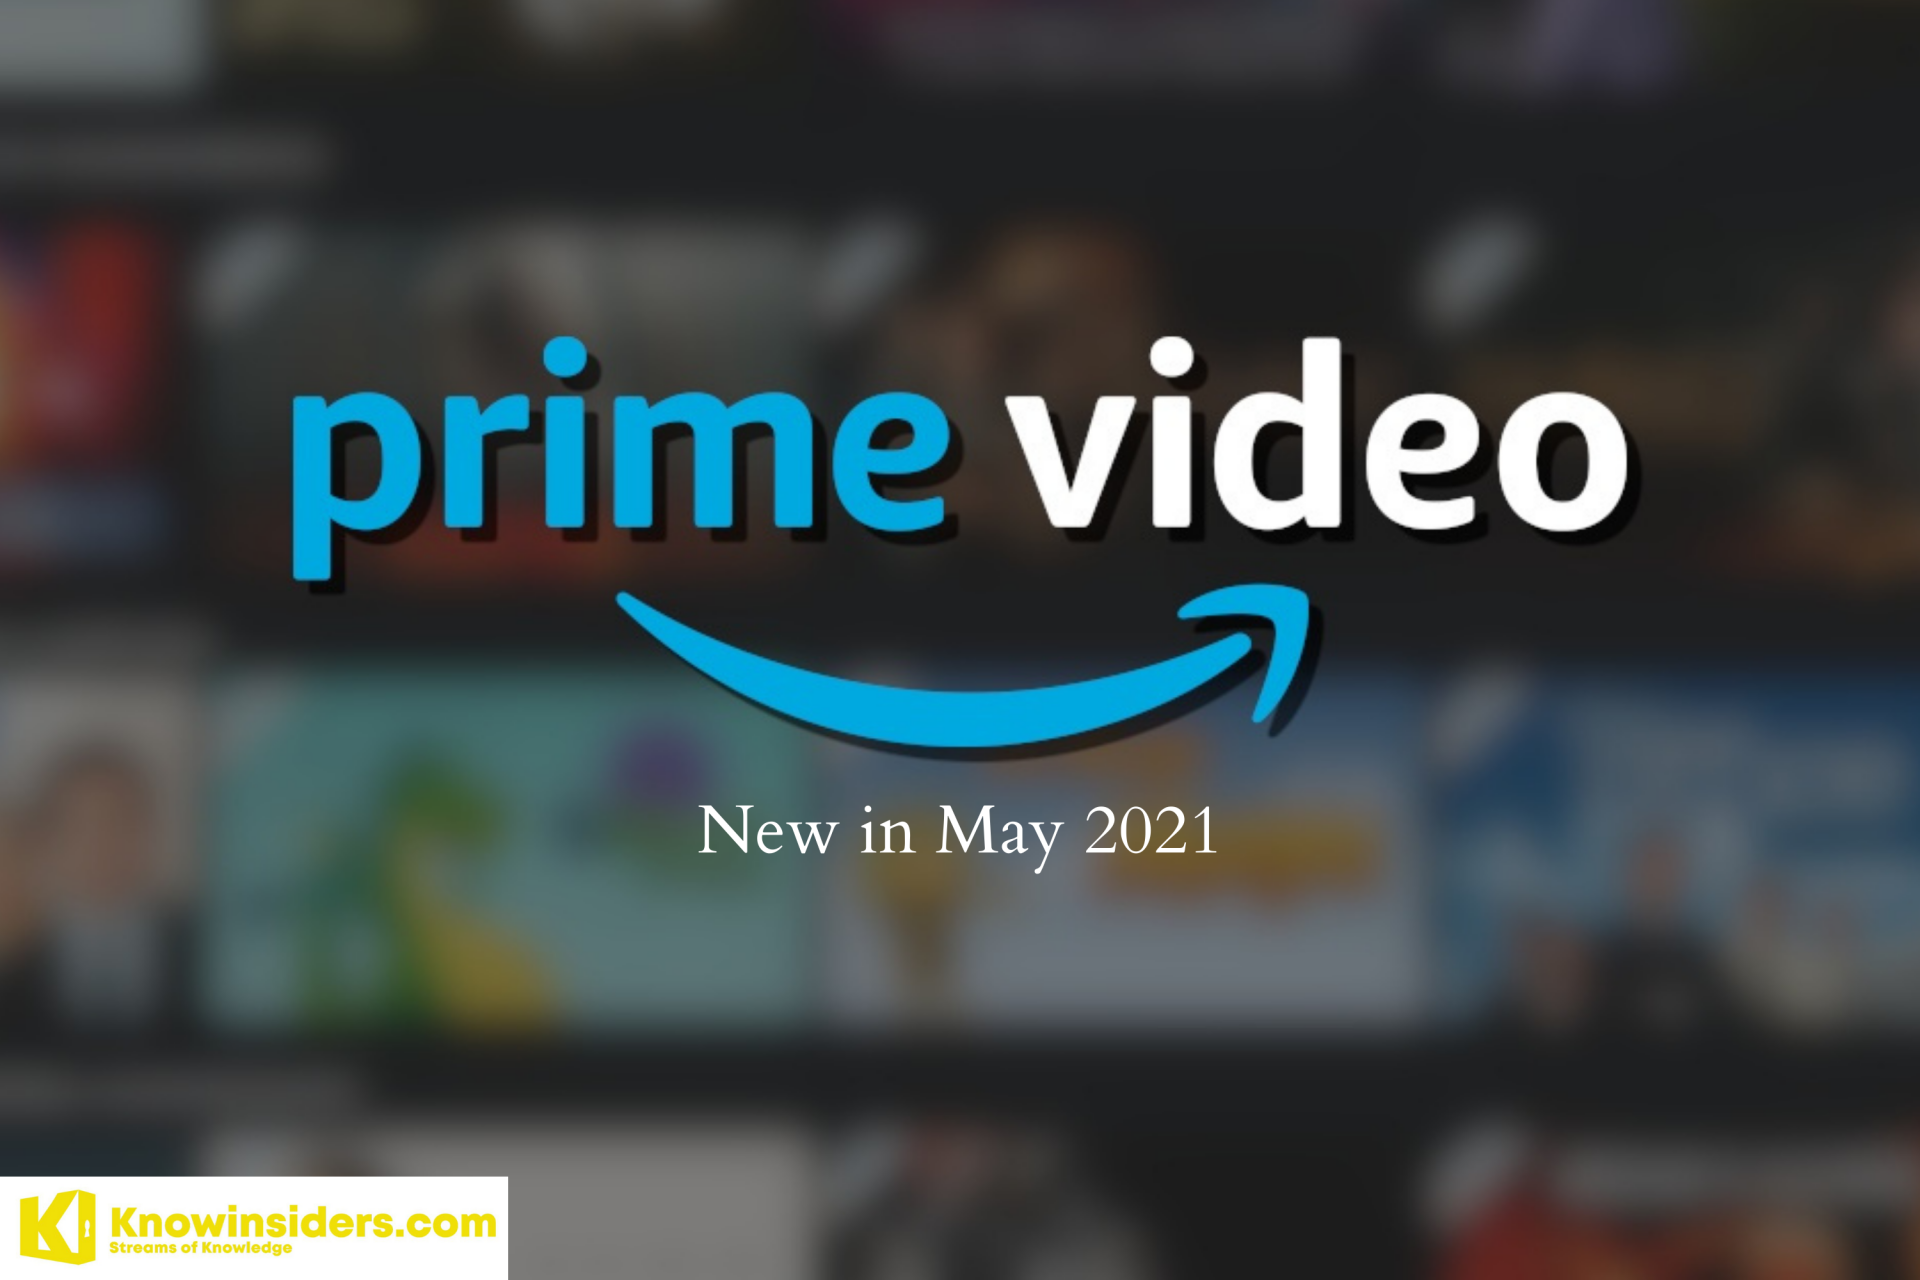 New TV Shows and Movies on Amazon Prime Video in May 2021